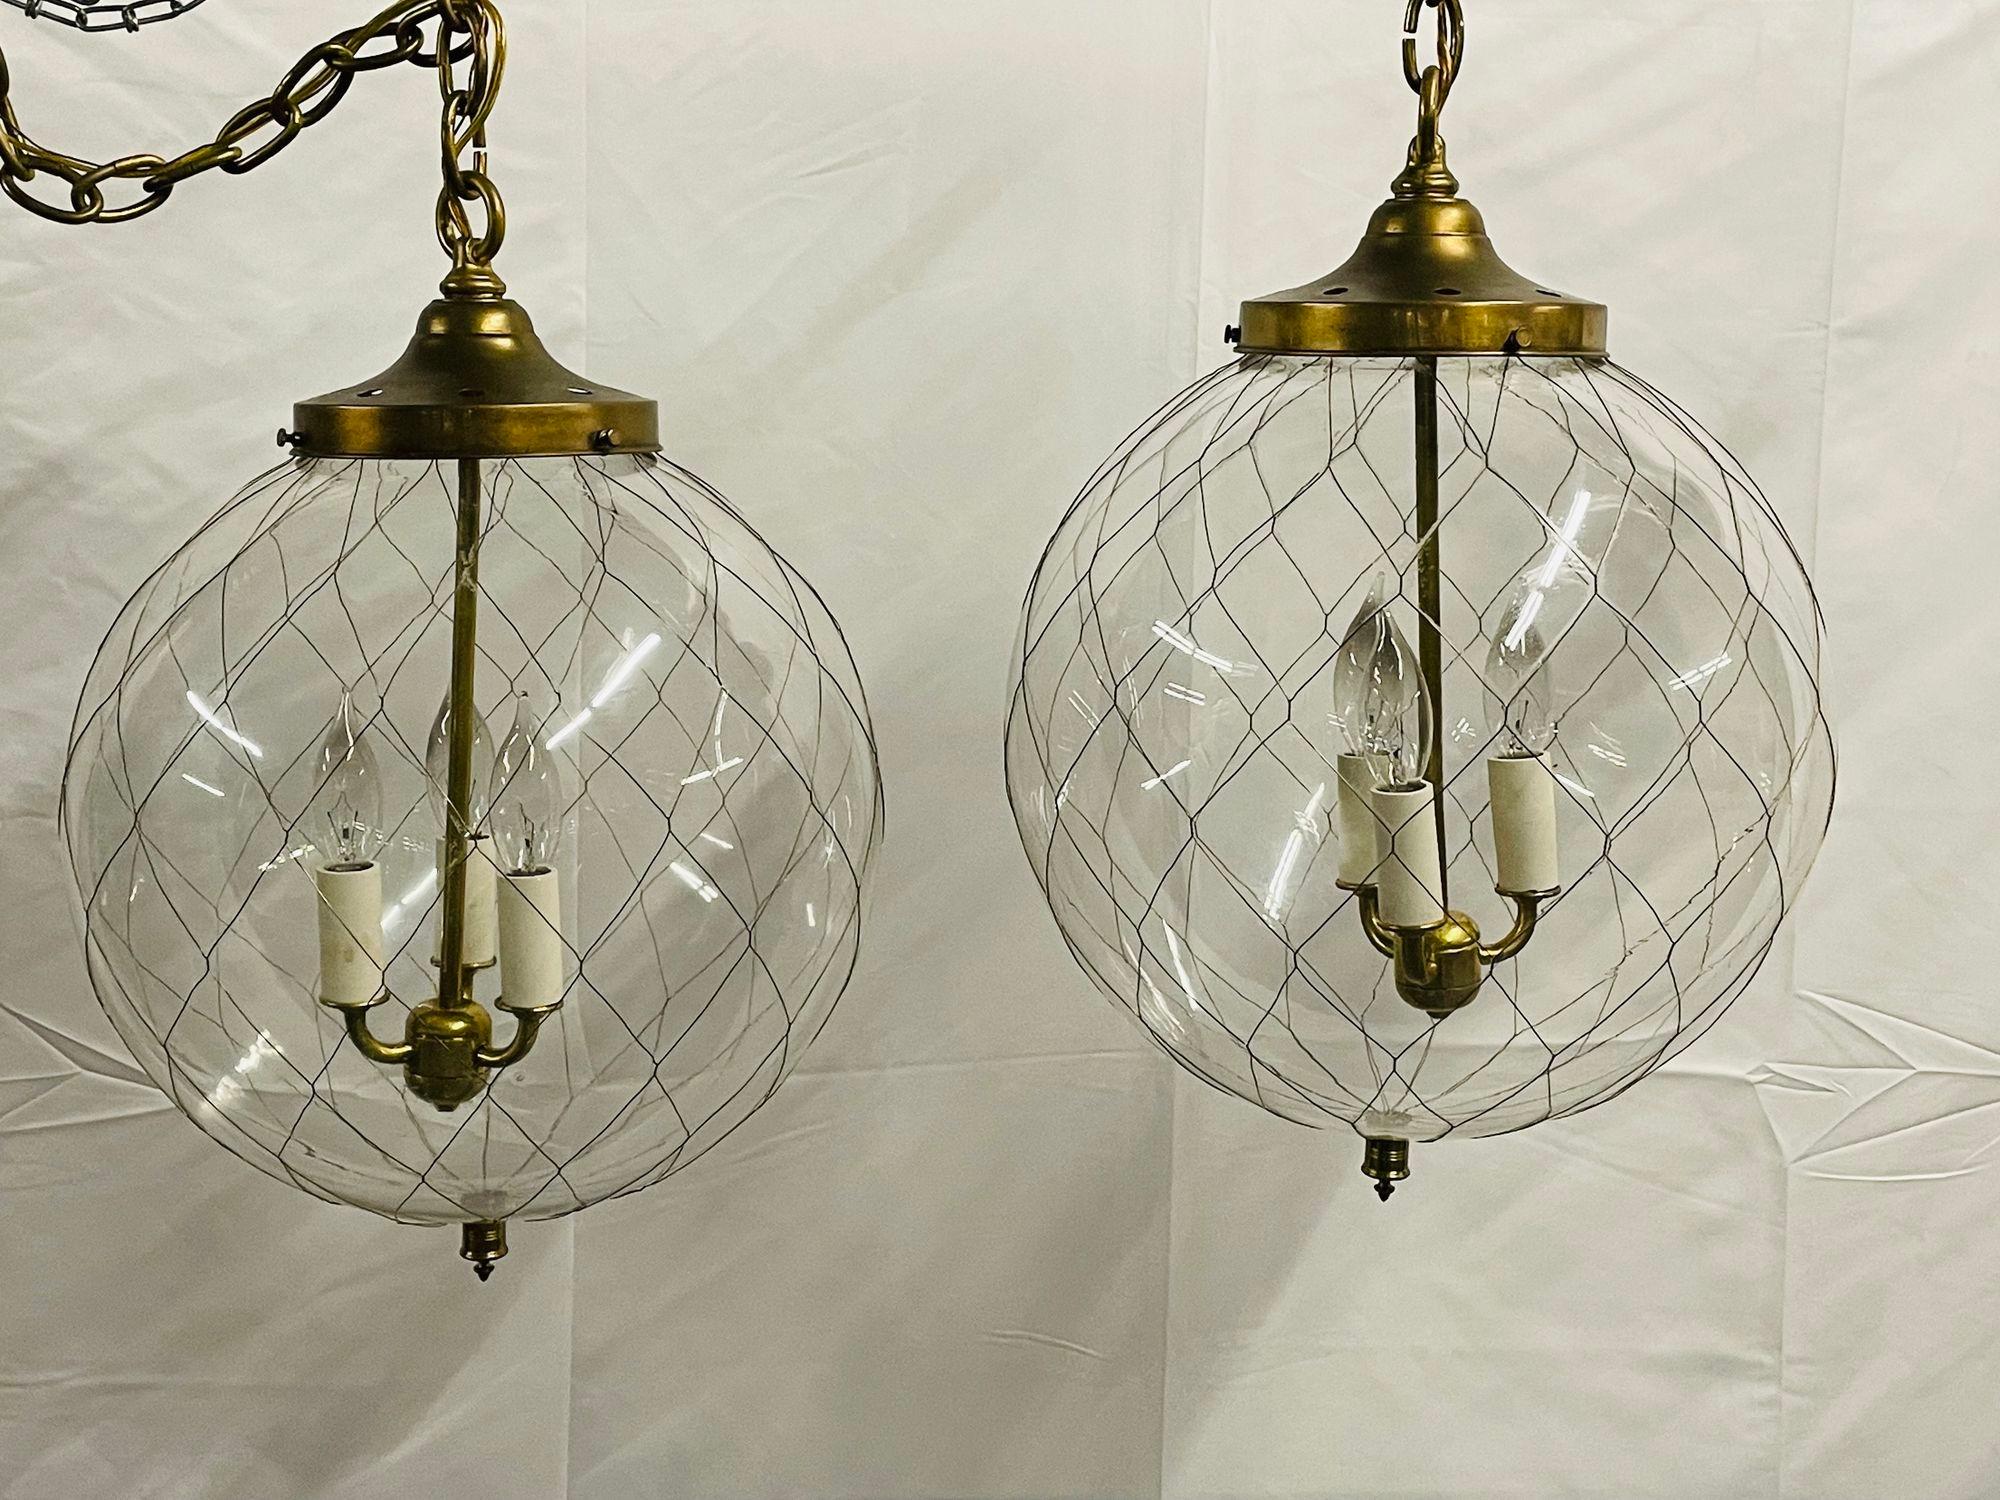 A pair of Mid-Century Modern globe pendants, brass spider web design and hand blown glass.
A finely decorator pair of hand blown glass glove pendant chandeliers. Each having a large hand blown glass circular dome covered in thin bronze reeding